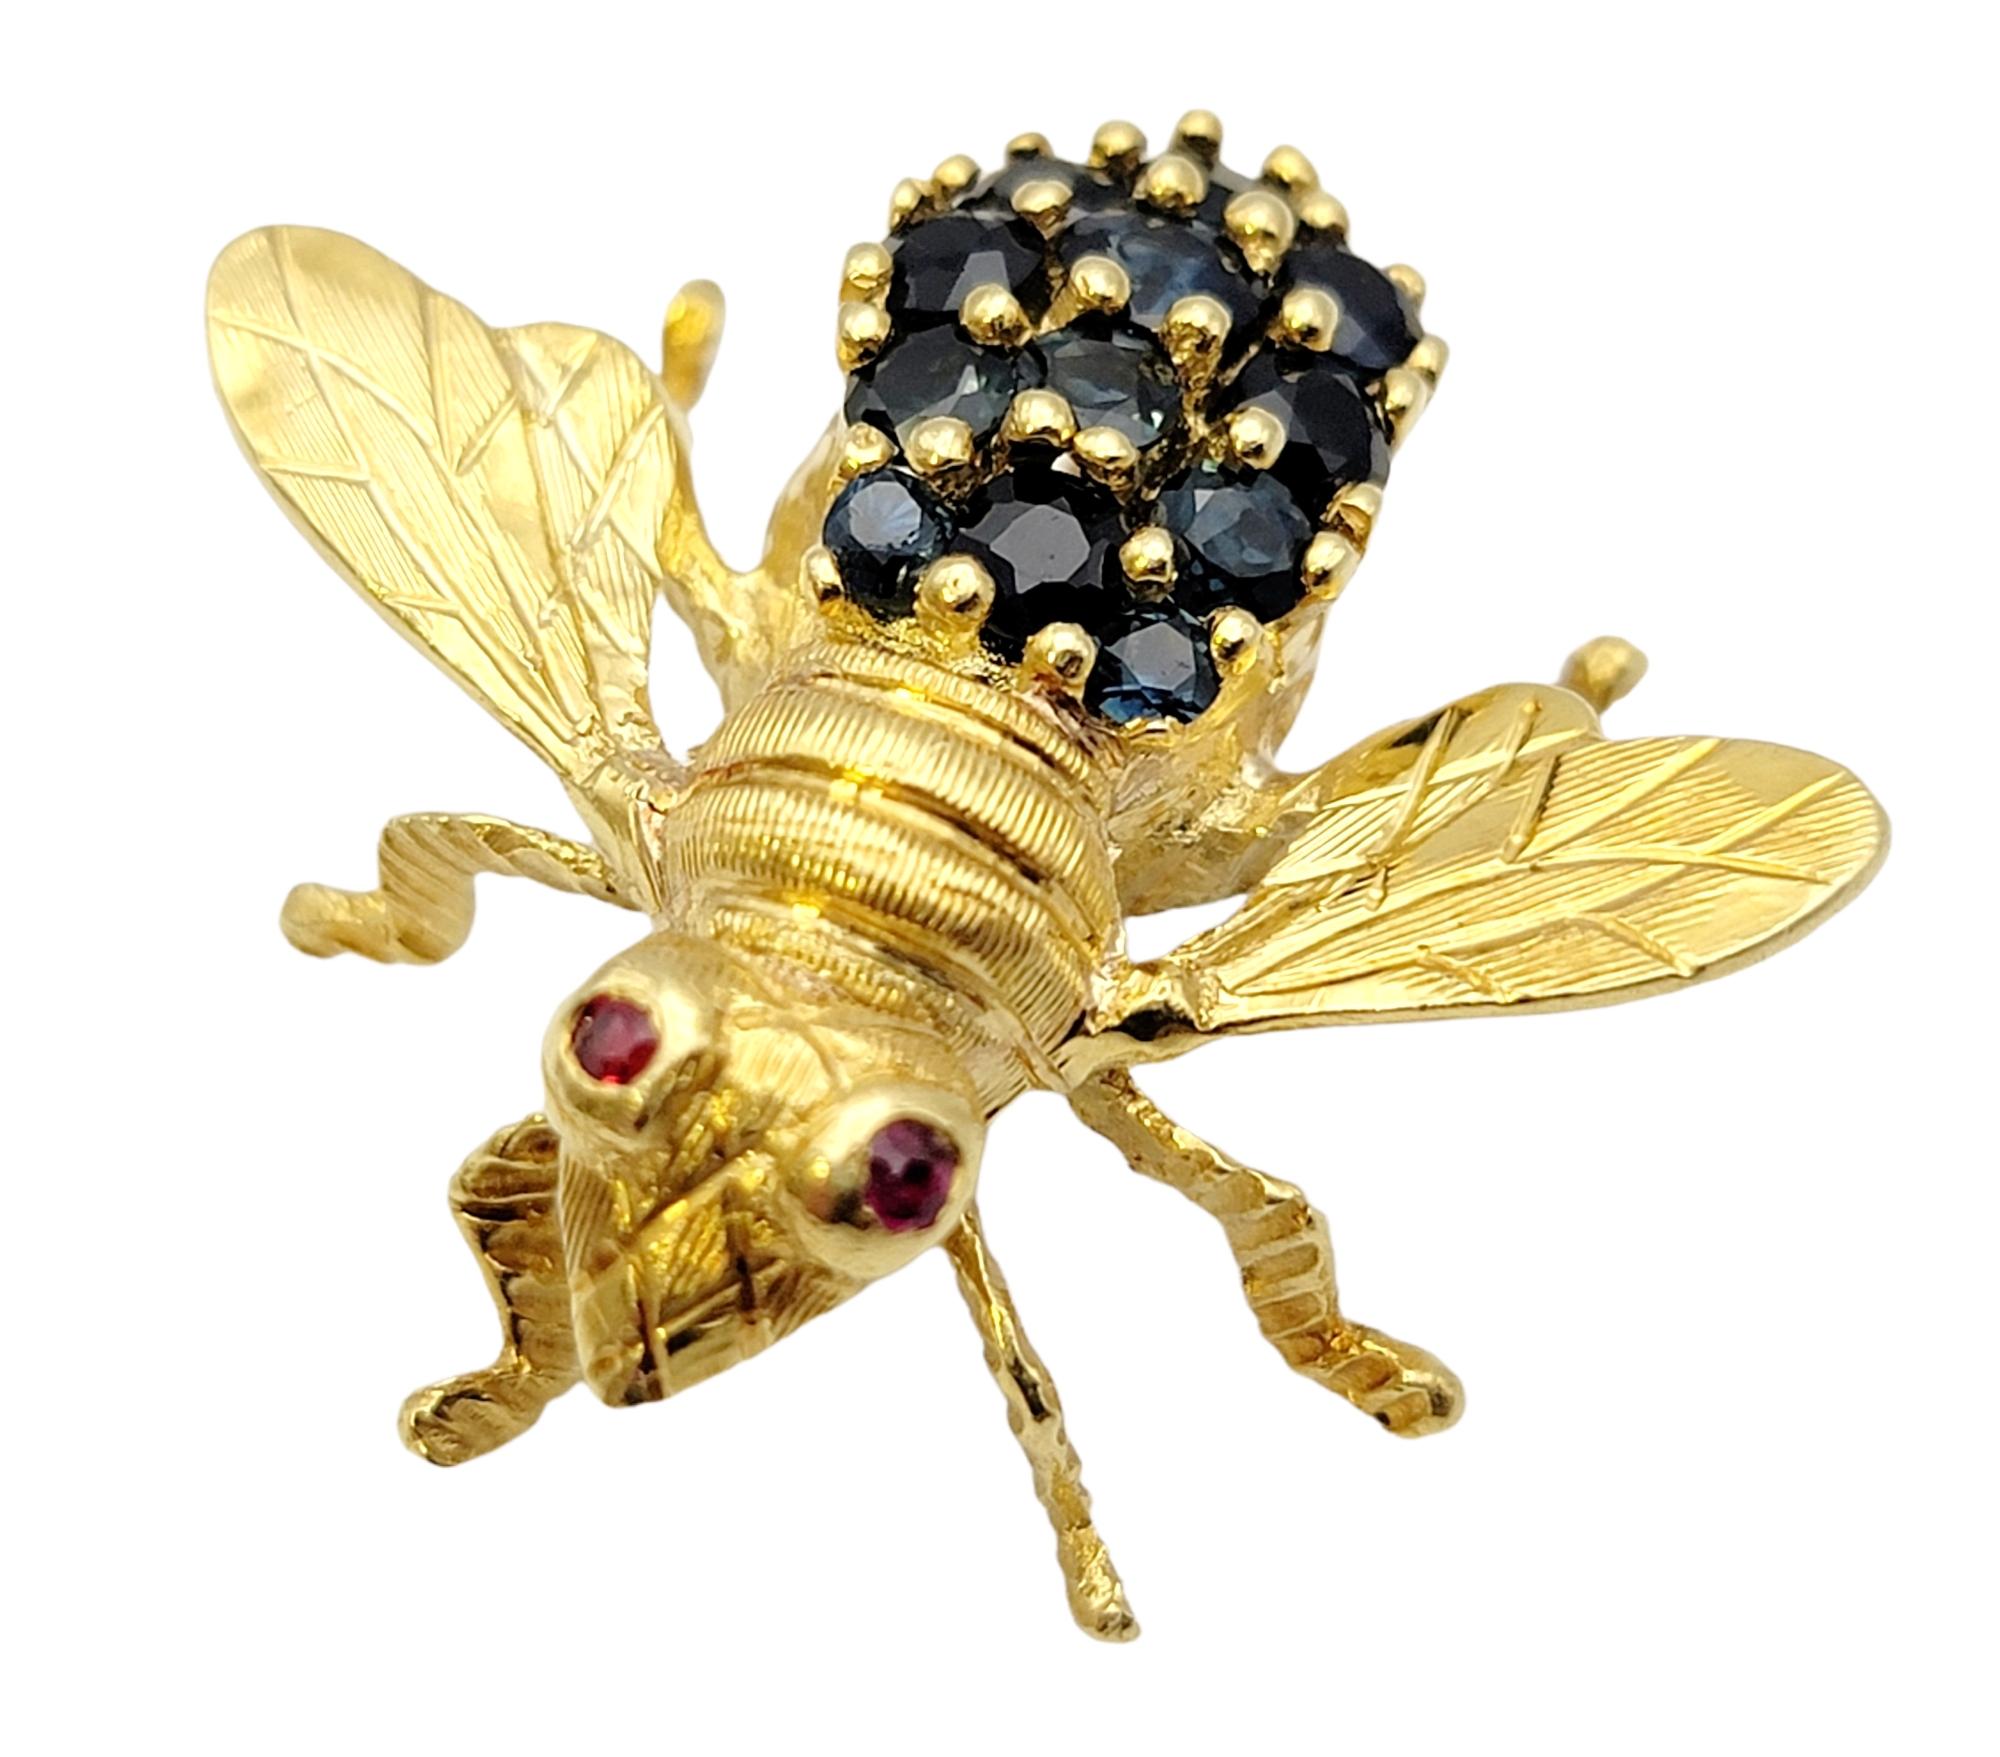 Beautifully detailed bee brooch accented with glittering sapphire and ruby accents. Made of solid 18 karat yellow gold, this exquisite vintage piece from the Hammerman Brothers is a work of art and a fantastic conversation piece. 2 natural red